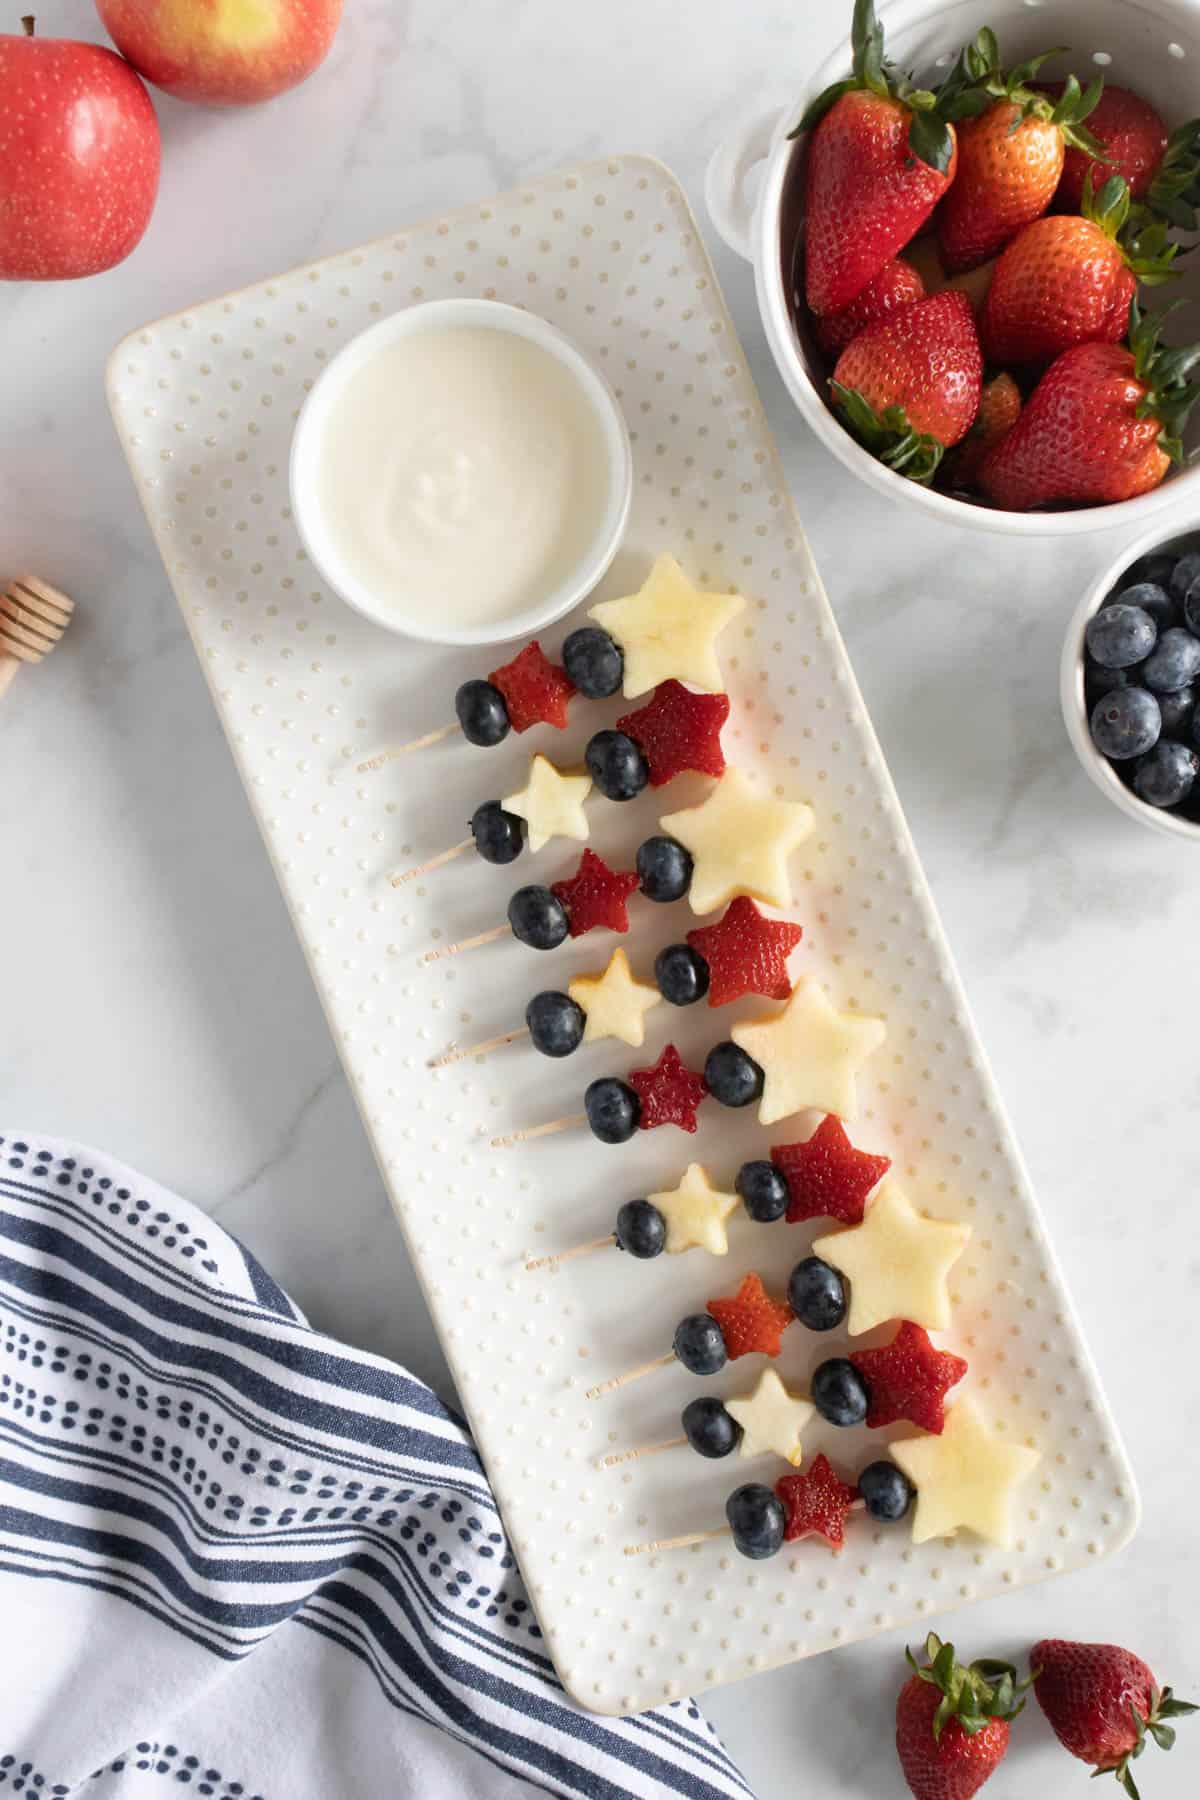 4th of July fruit kabobs lined up in a row on a white plate with a bowl of yogurt dip for dipping.